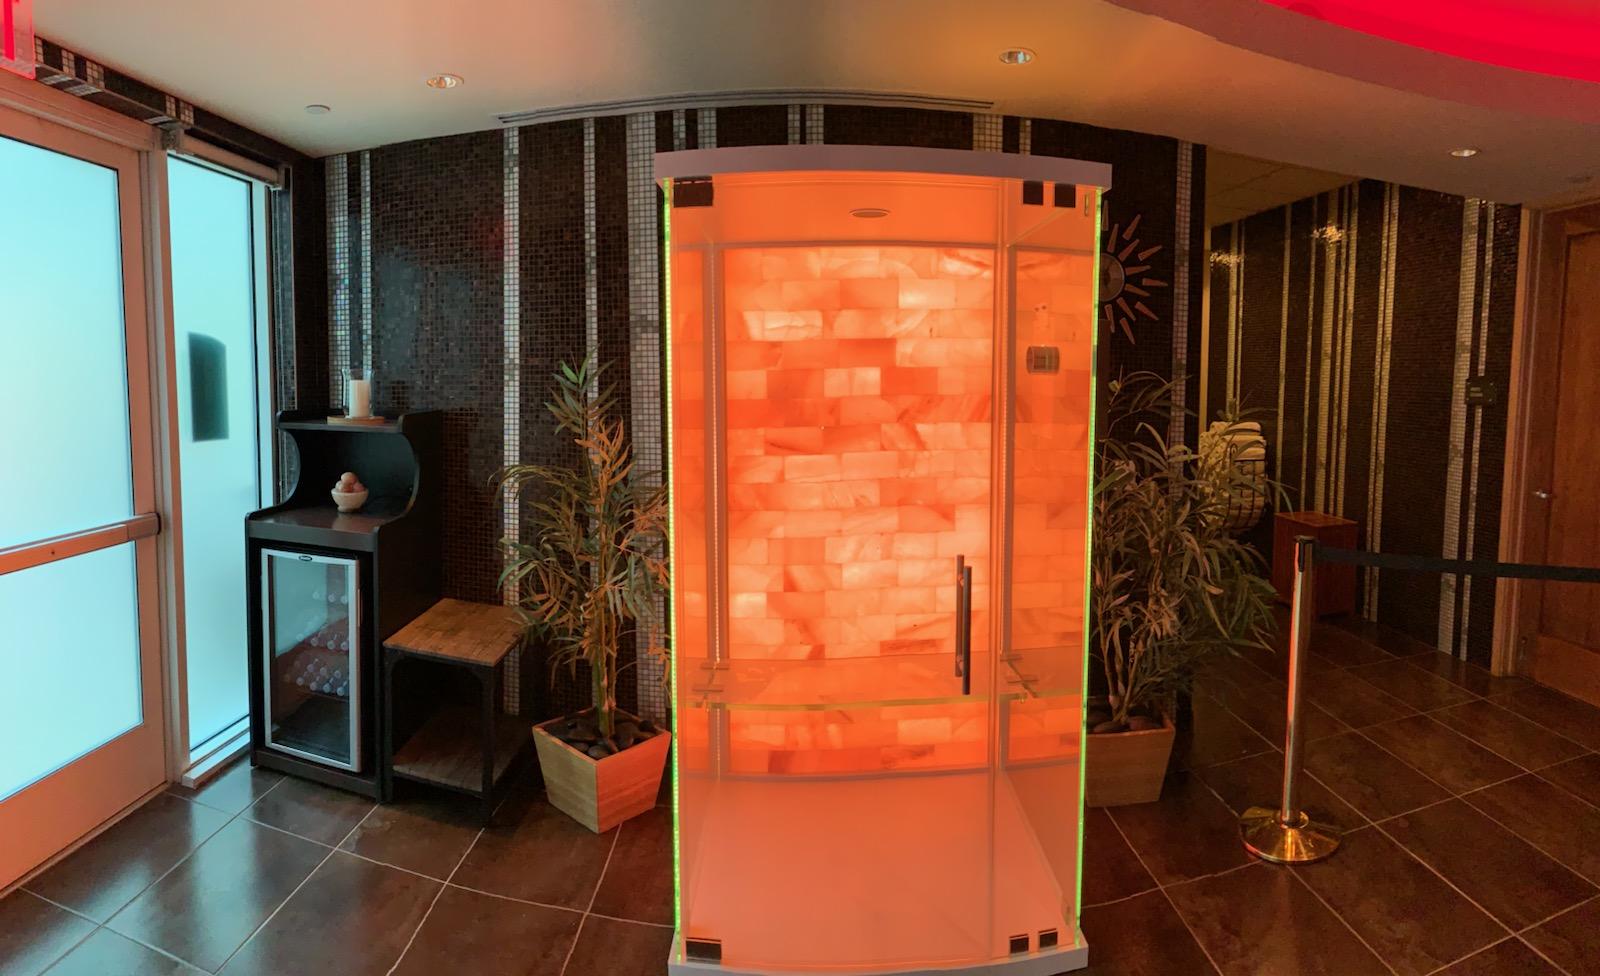 Salt and sound booth with a salt stone wall backlit with orange lighting on a grey tiled floor with two plants behind it against a tiled wall.